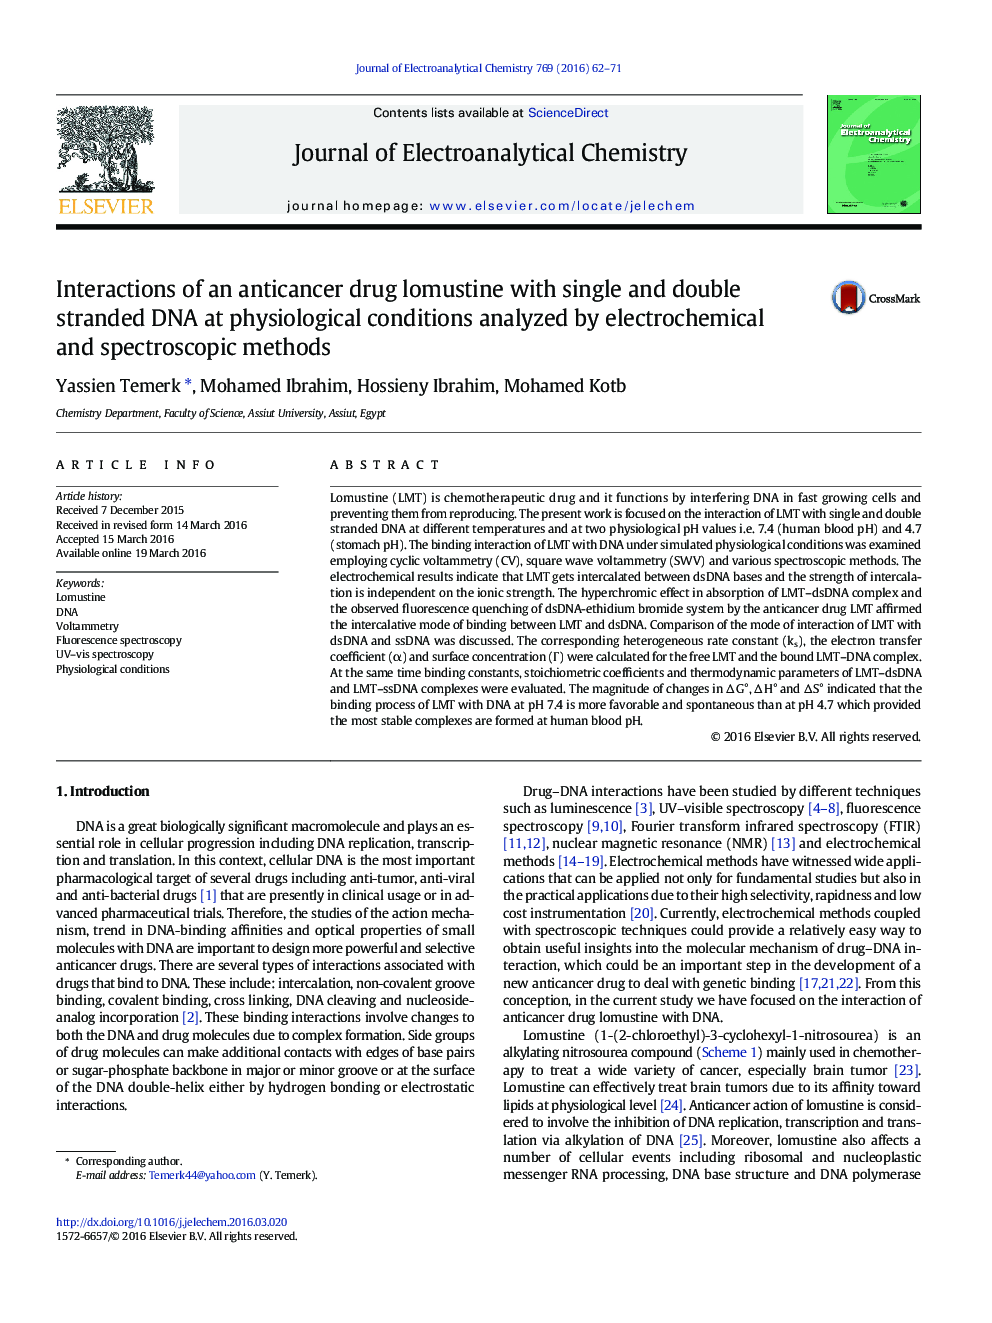 Interactions of an anticancer drug lomustine with single and double stranded DNA at physiological conditions analyzed by electrochemical and spectroscopic methods